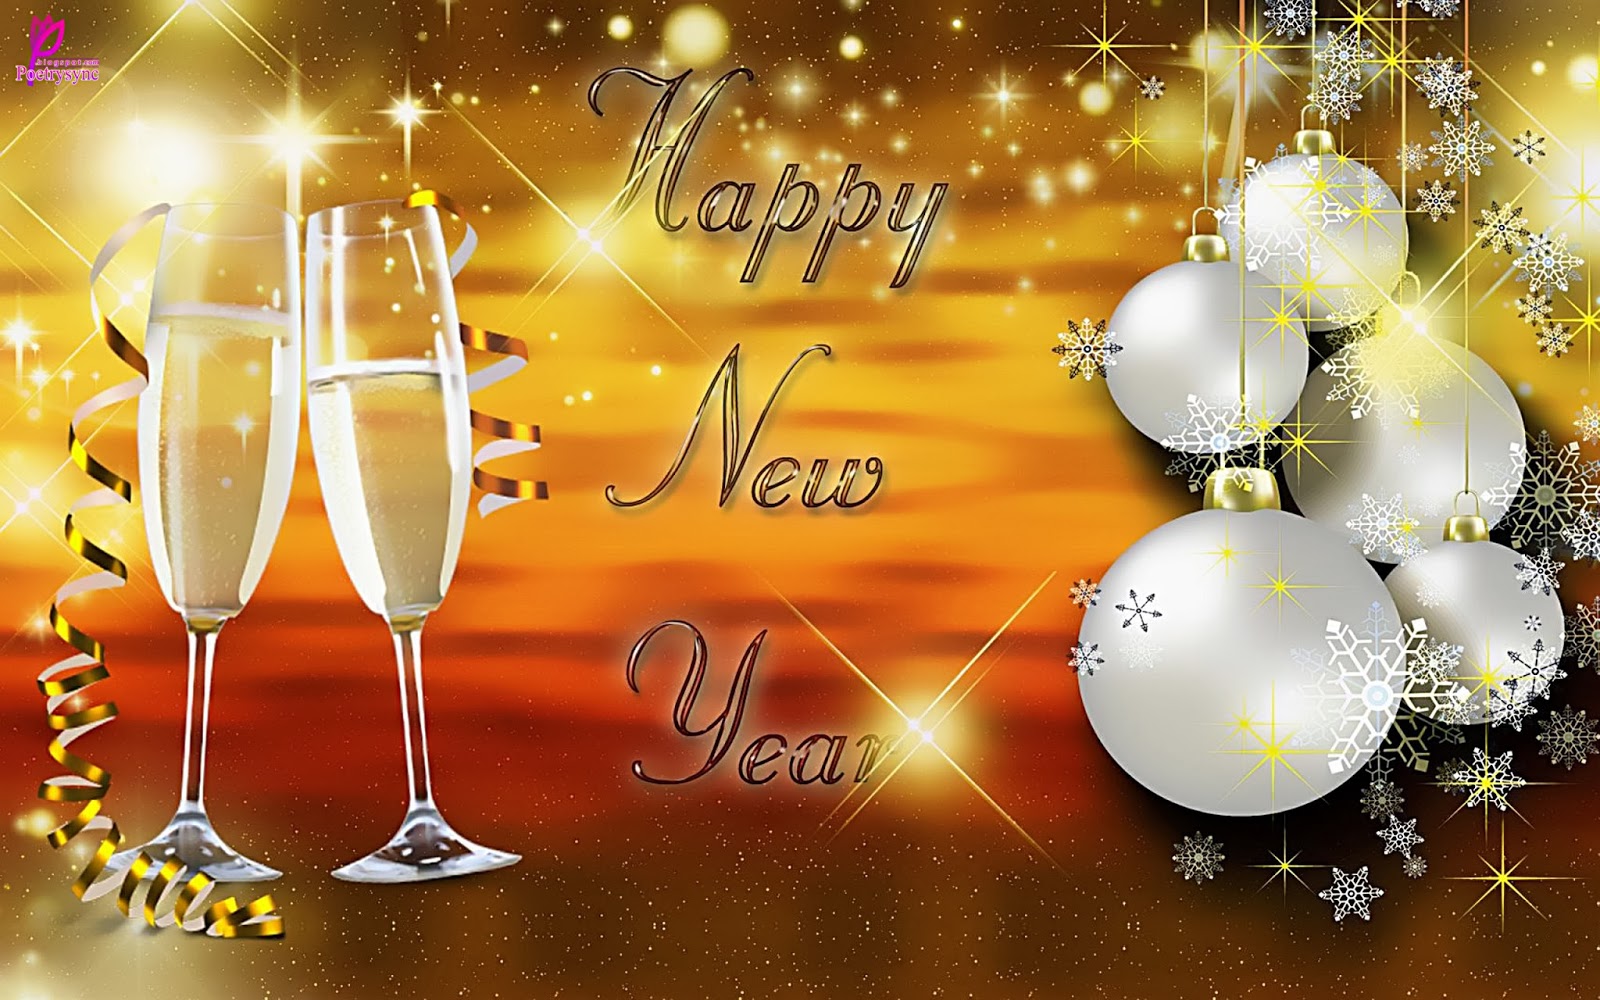 Happy New Year Wishes And Christmas Wallpaper With Greetings